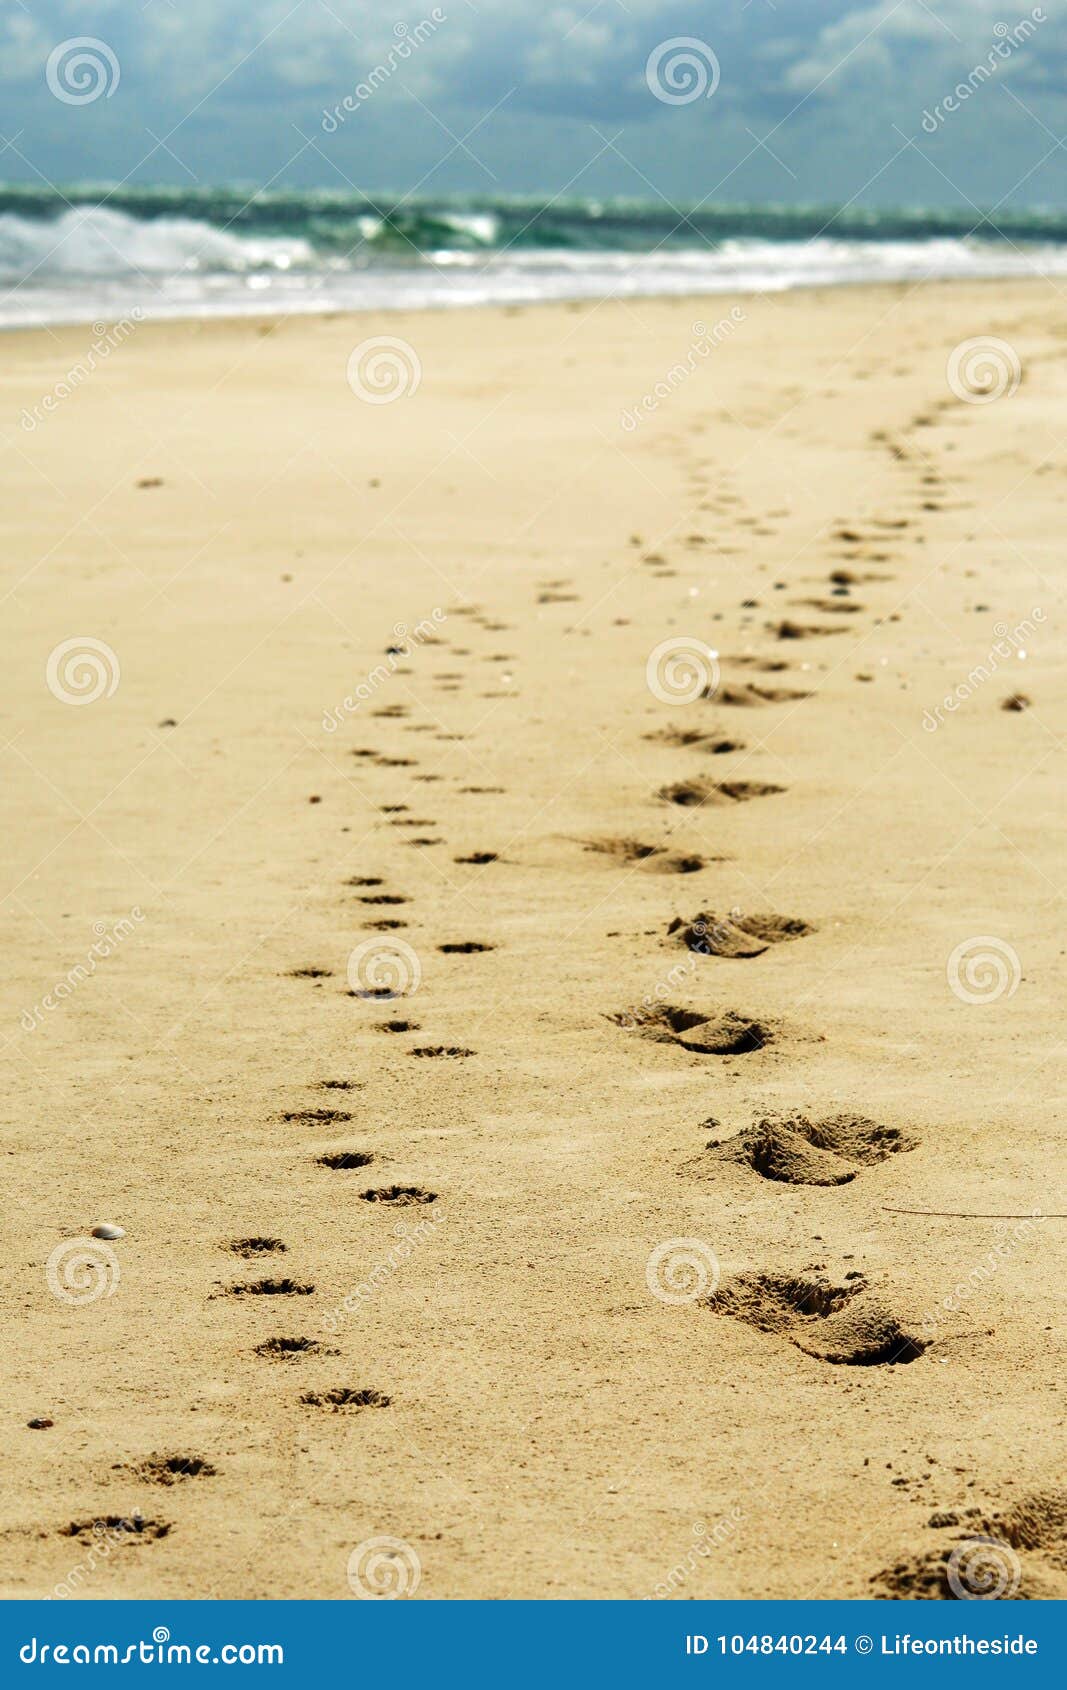 Human and Dog Footprints in Beach Sand Phone Wallpaper Stock Photo - Image  of companions, holidays: 104840244